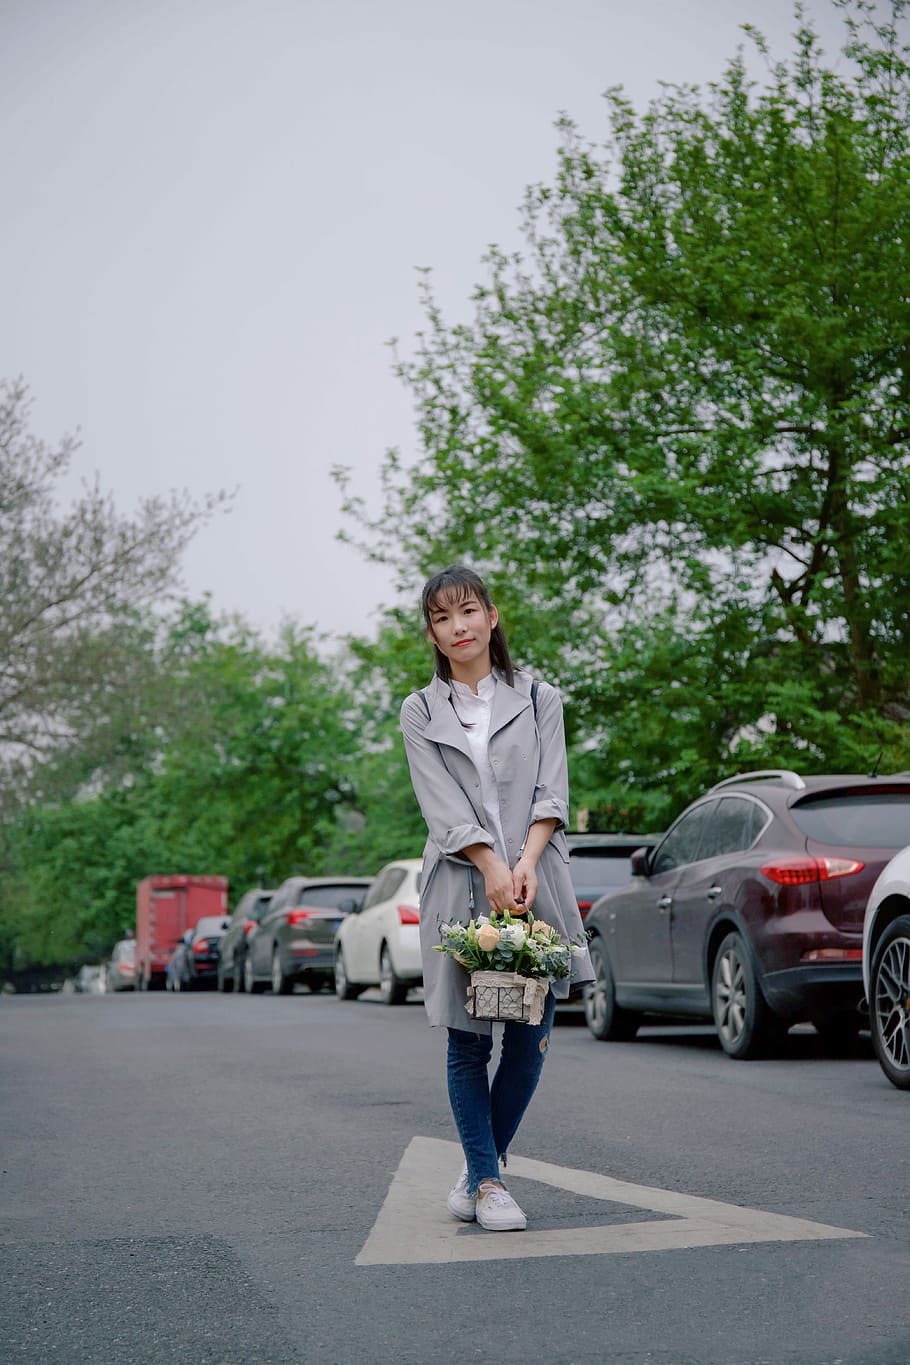 woman holding basket of flower standing in middle of road near parked vehicles, woman holding basket standing near vehicles on road under tree at daytime